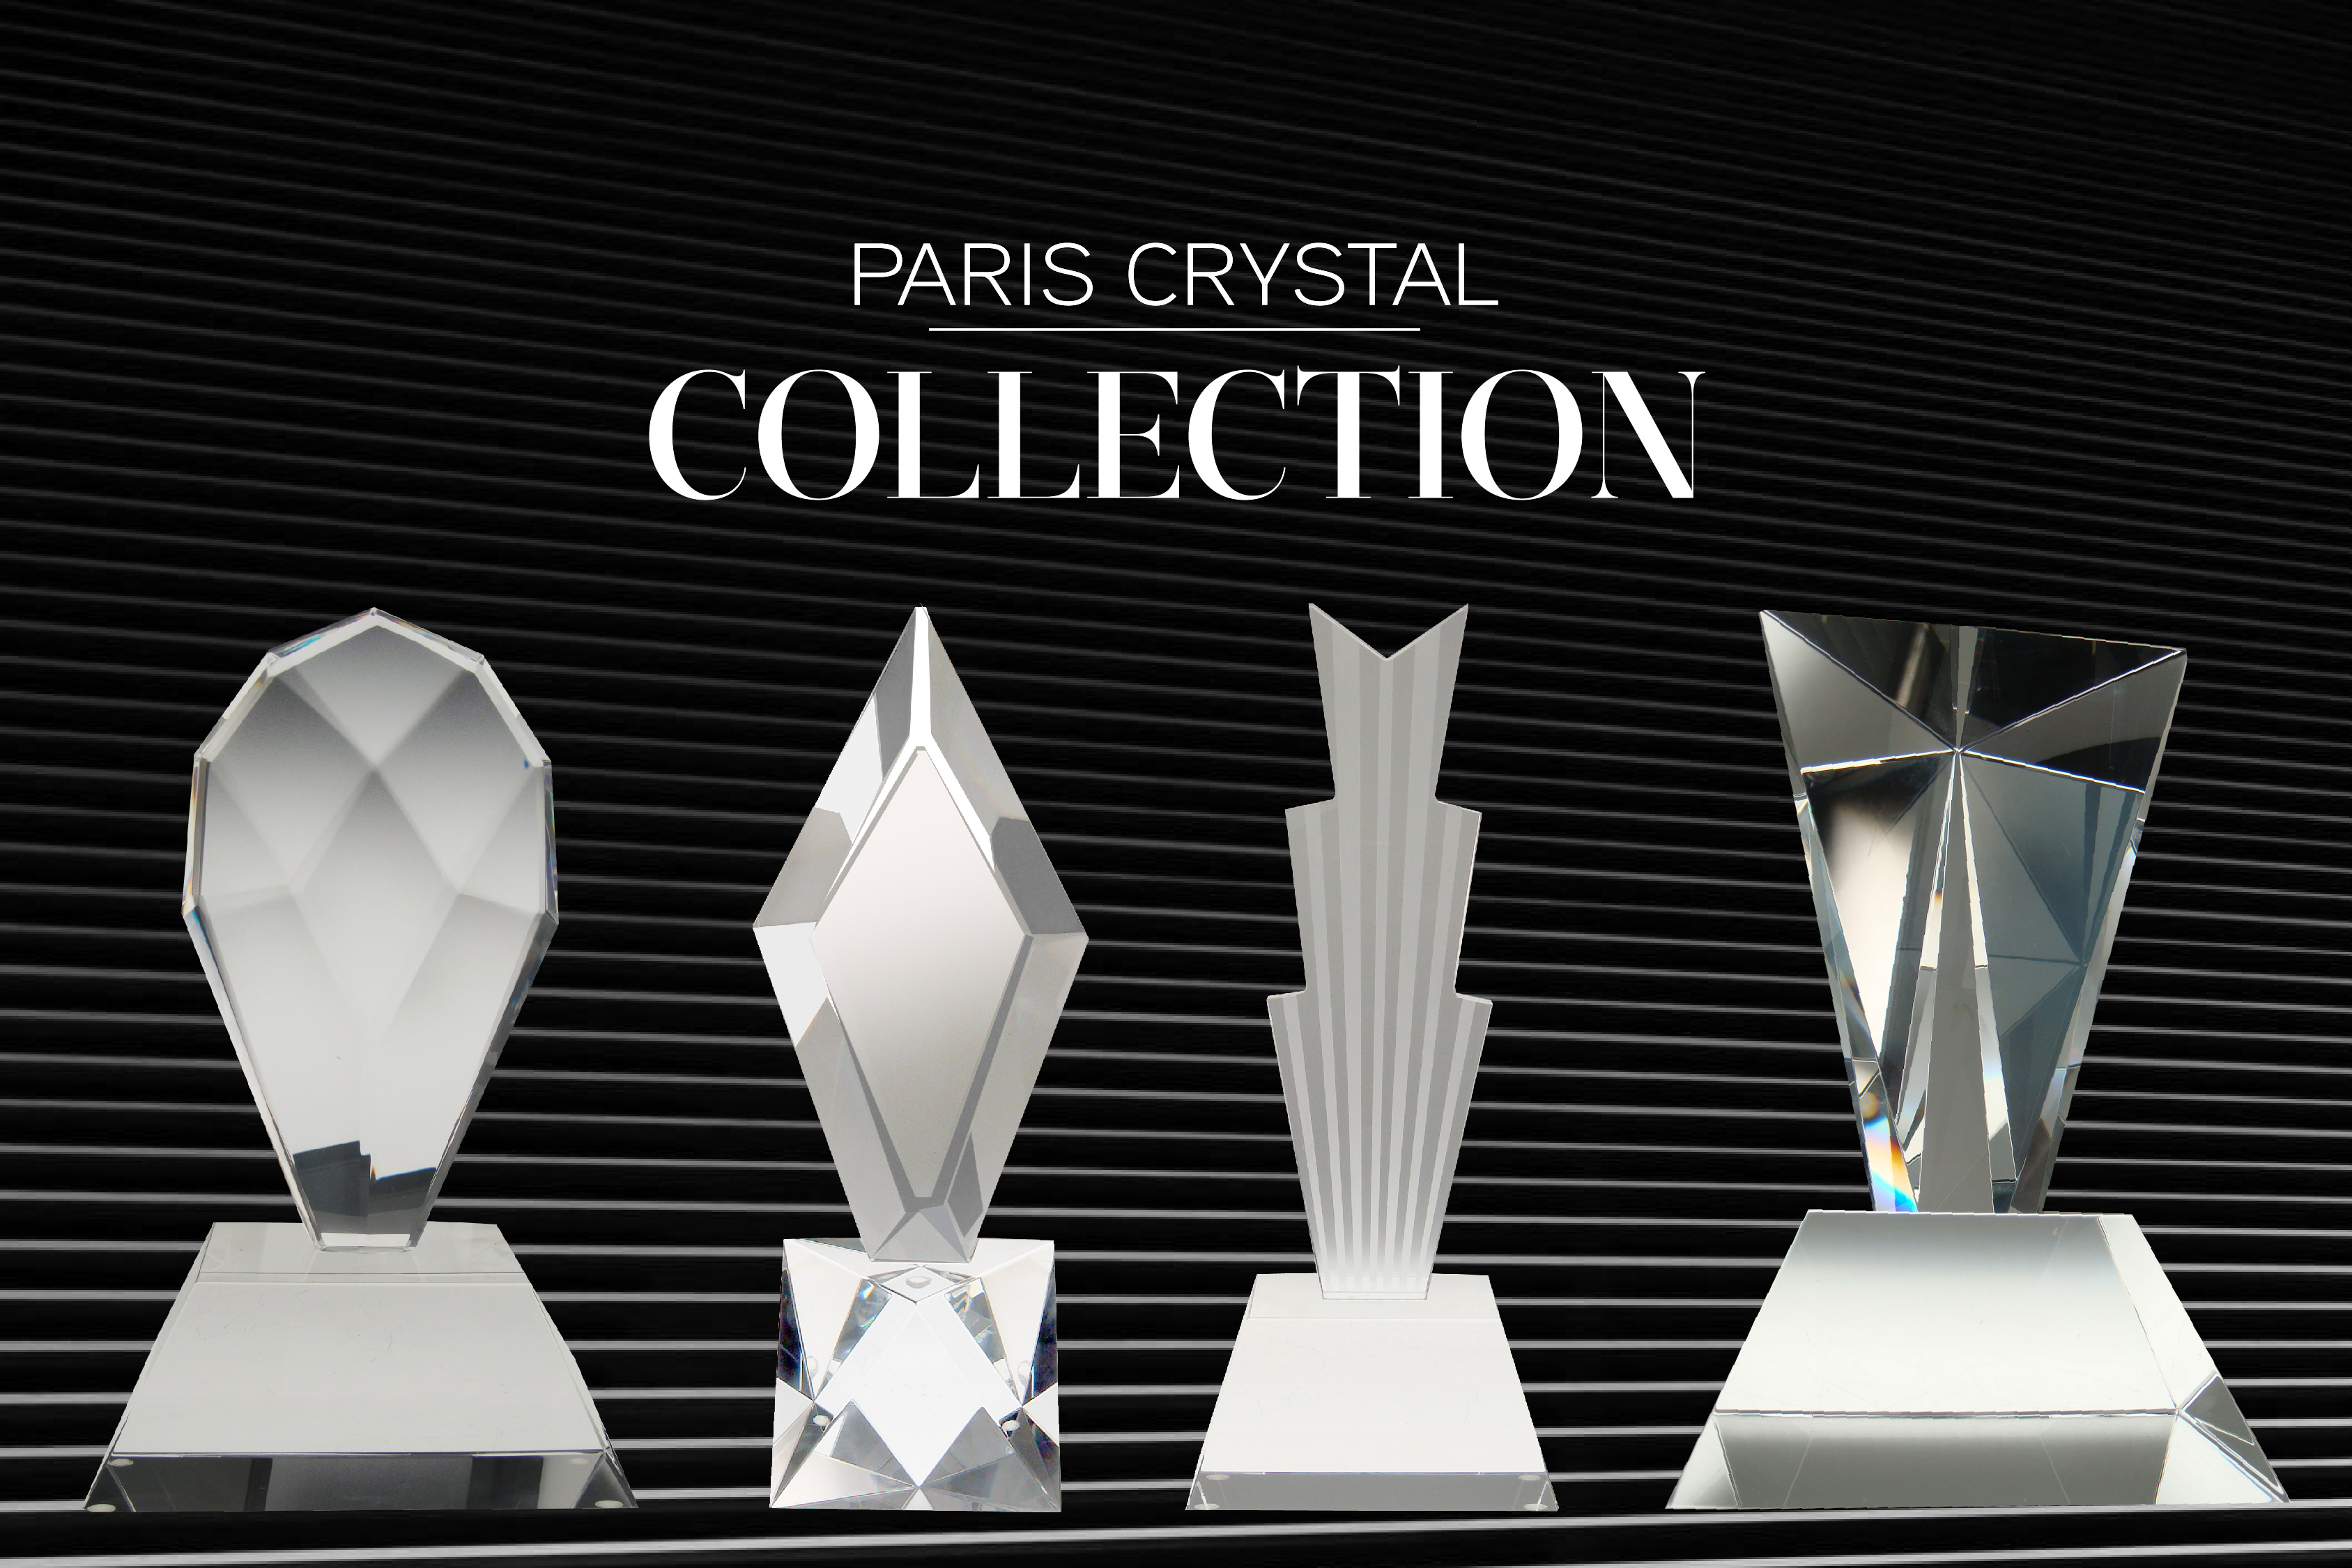 The four crystal trophy designs from the Paris Crystals exclusive collection of awards